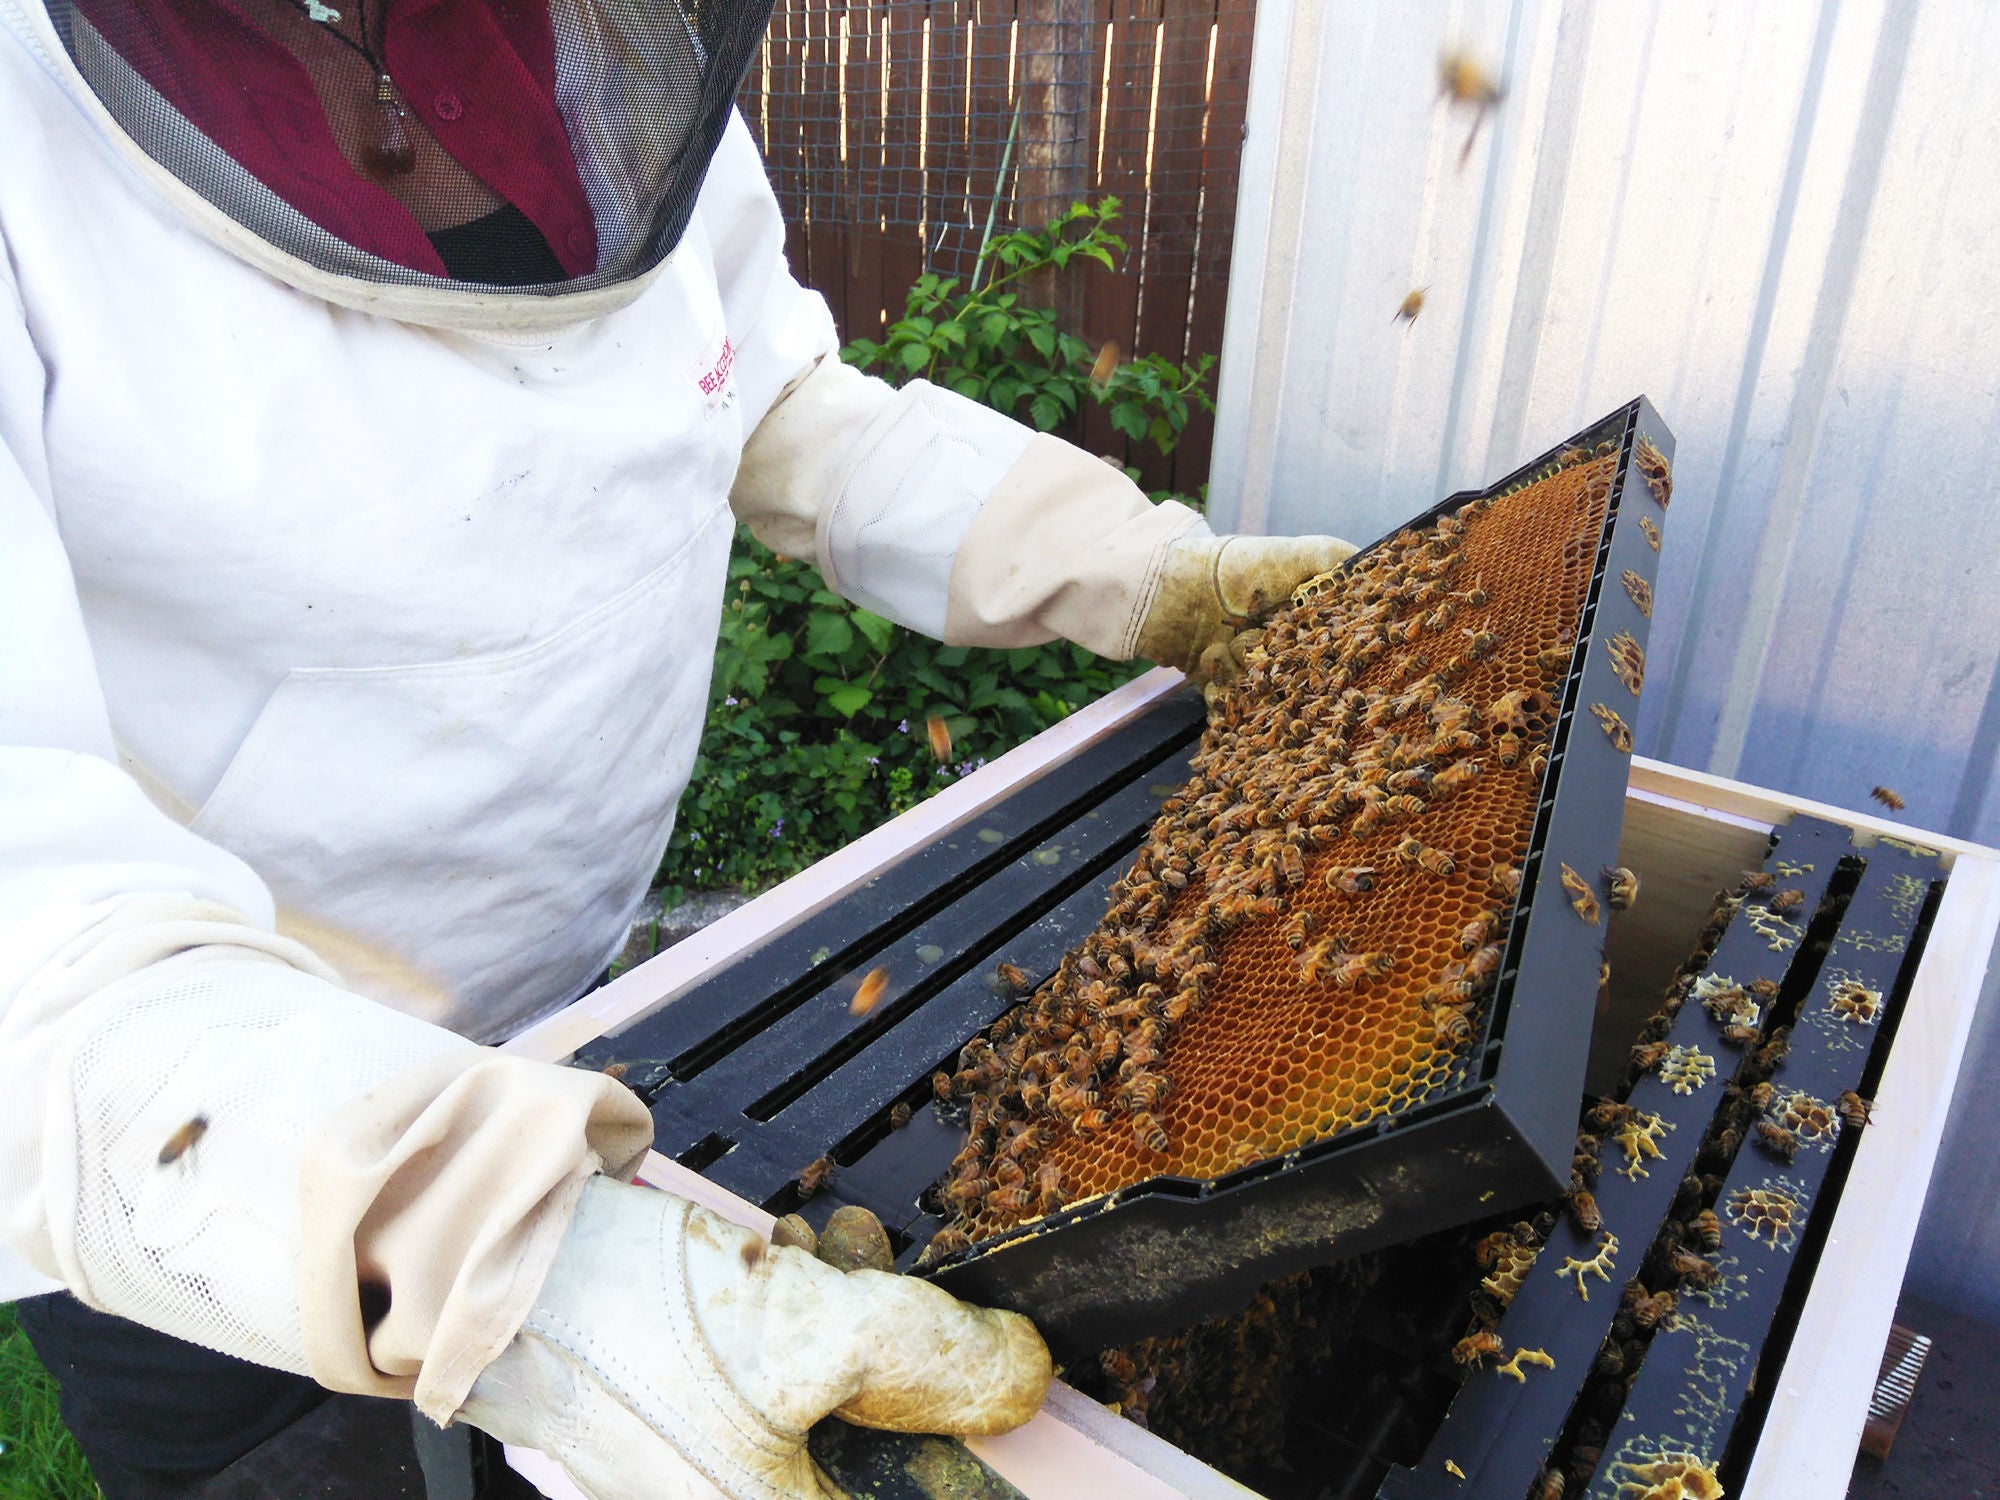 Staying safe when beekeeping